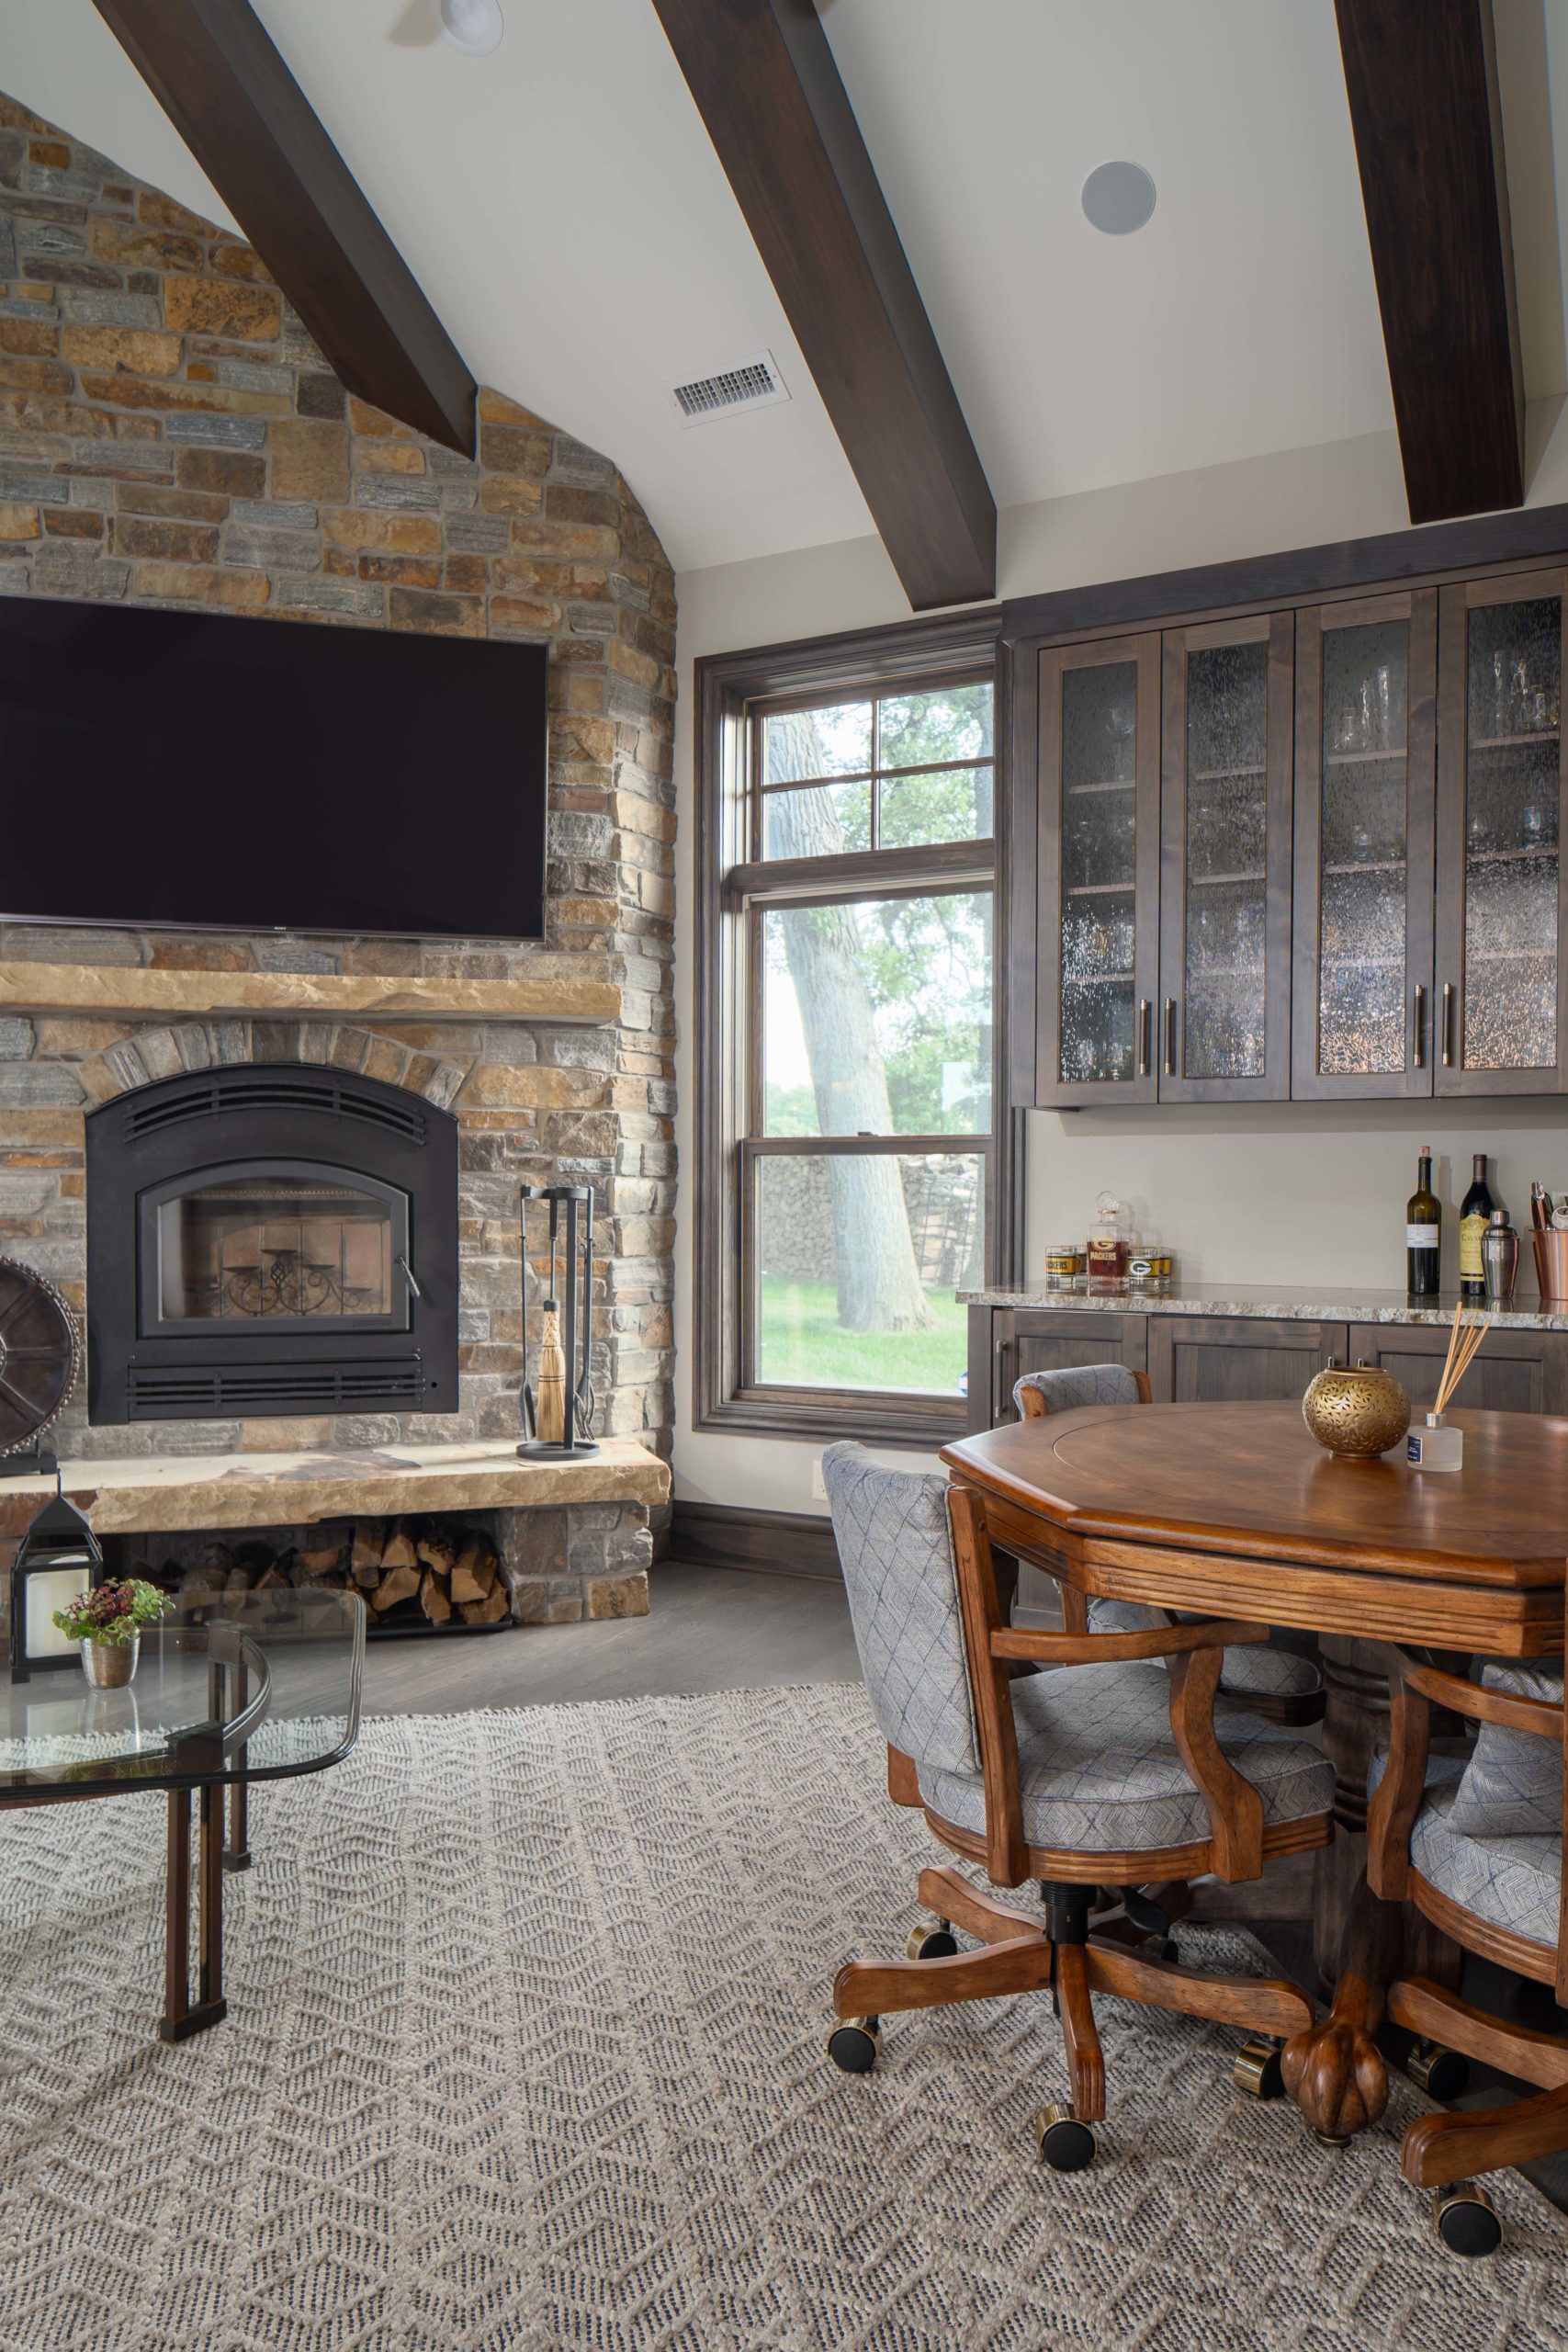 A stone fireplace in a living room on White Oak Lane.